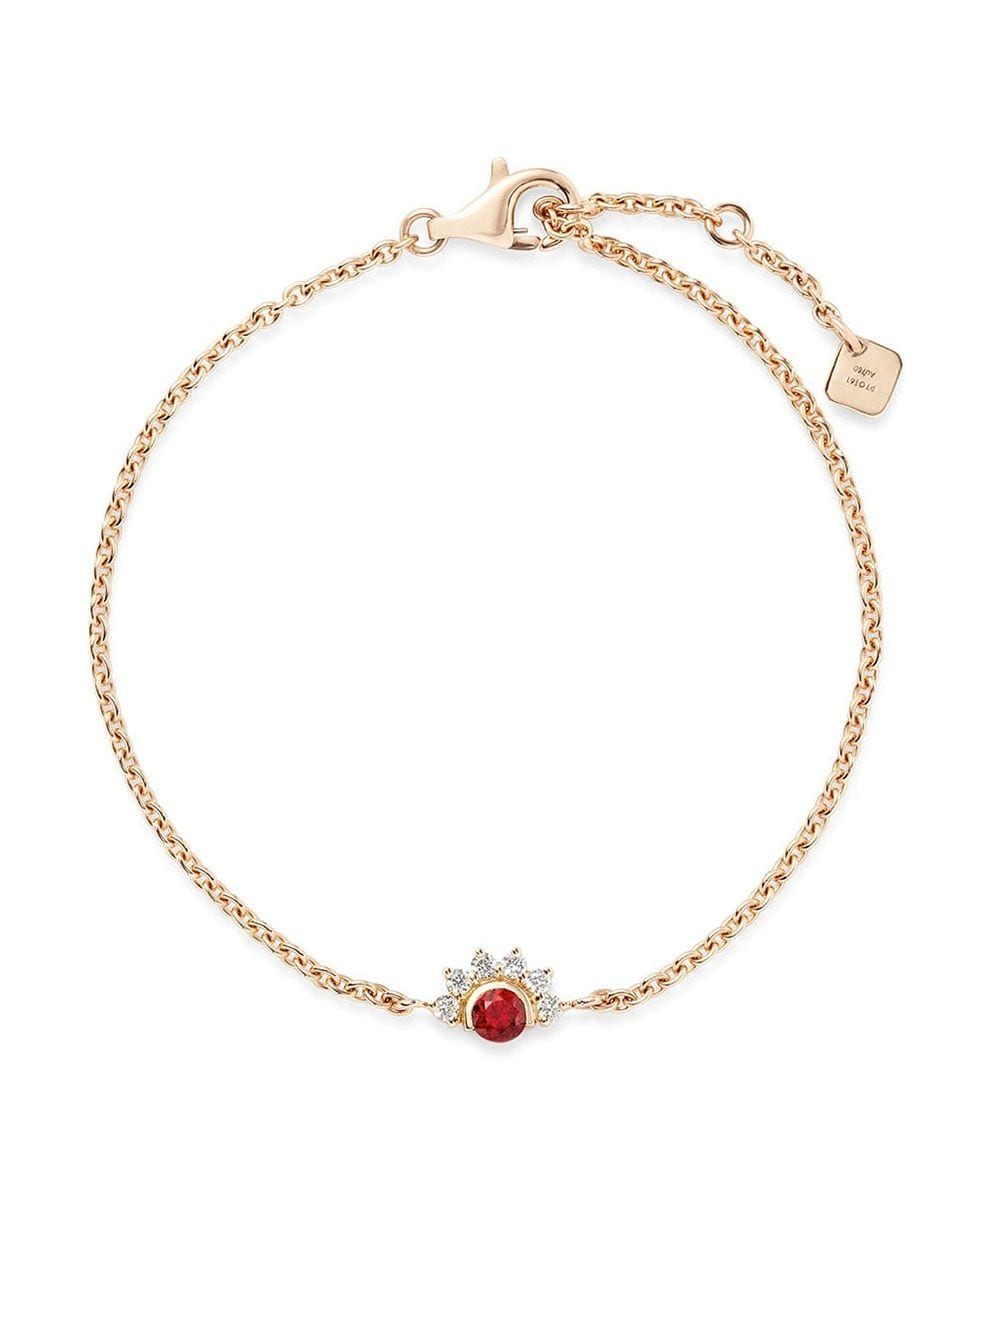 18kt yellow gold Mystic diamond and red spinel bracelet